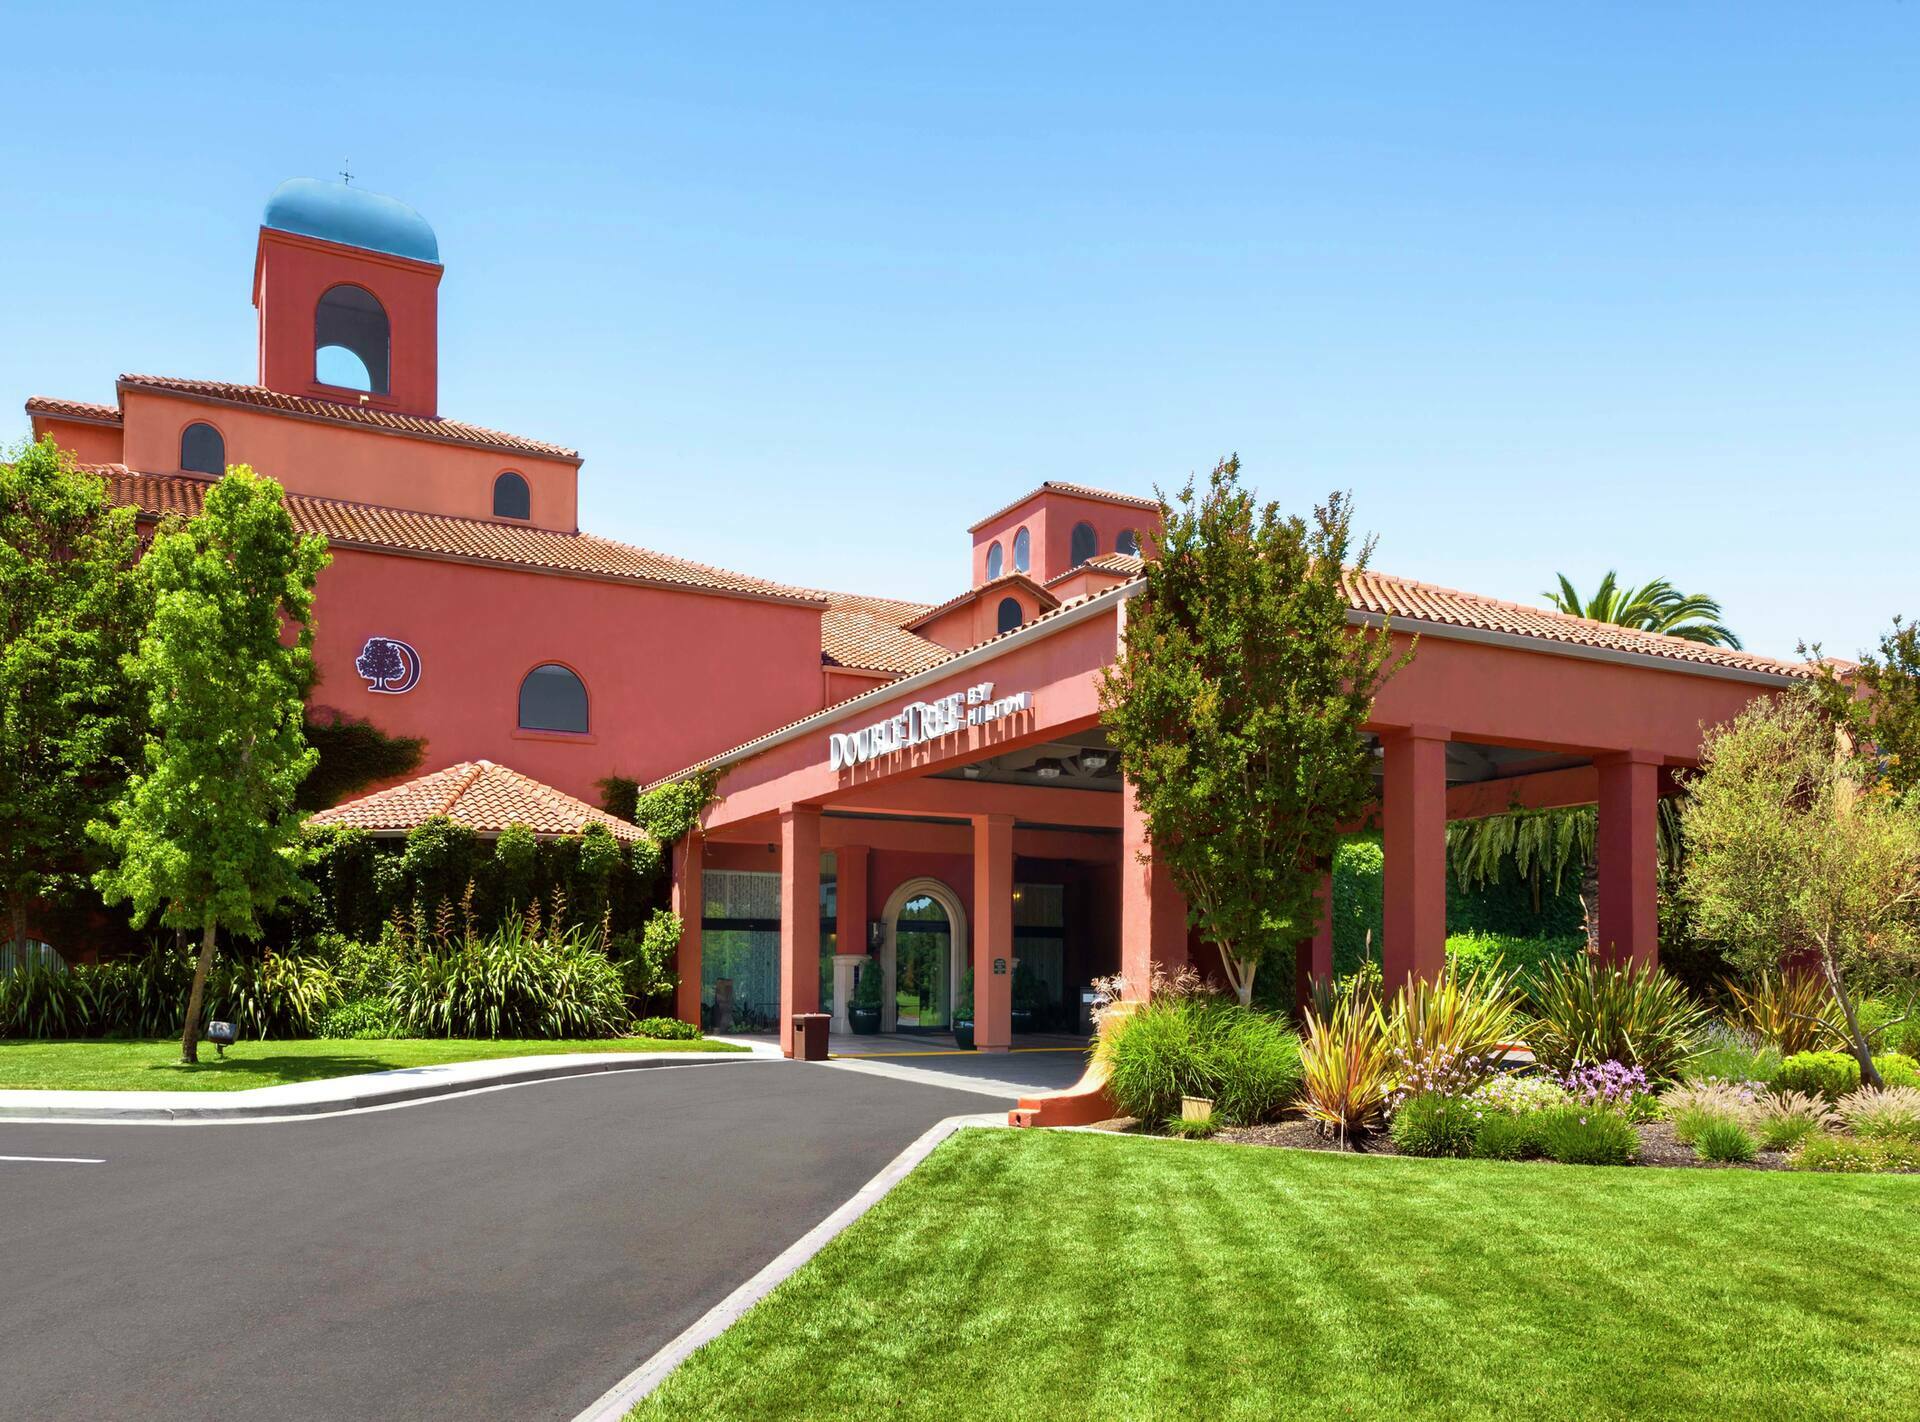 Photo of DoubleTree by Hilton Hotel Sonoma Wine Country, Rohnert Park, CA